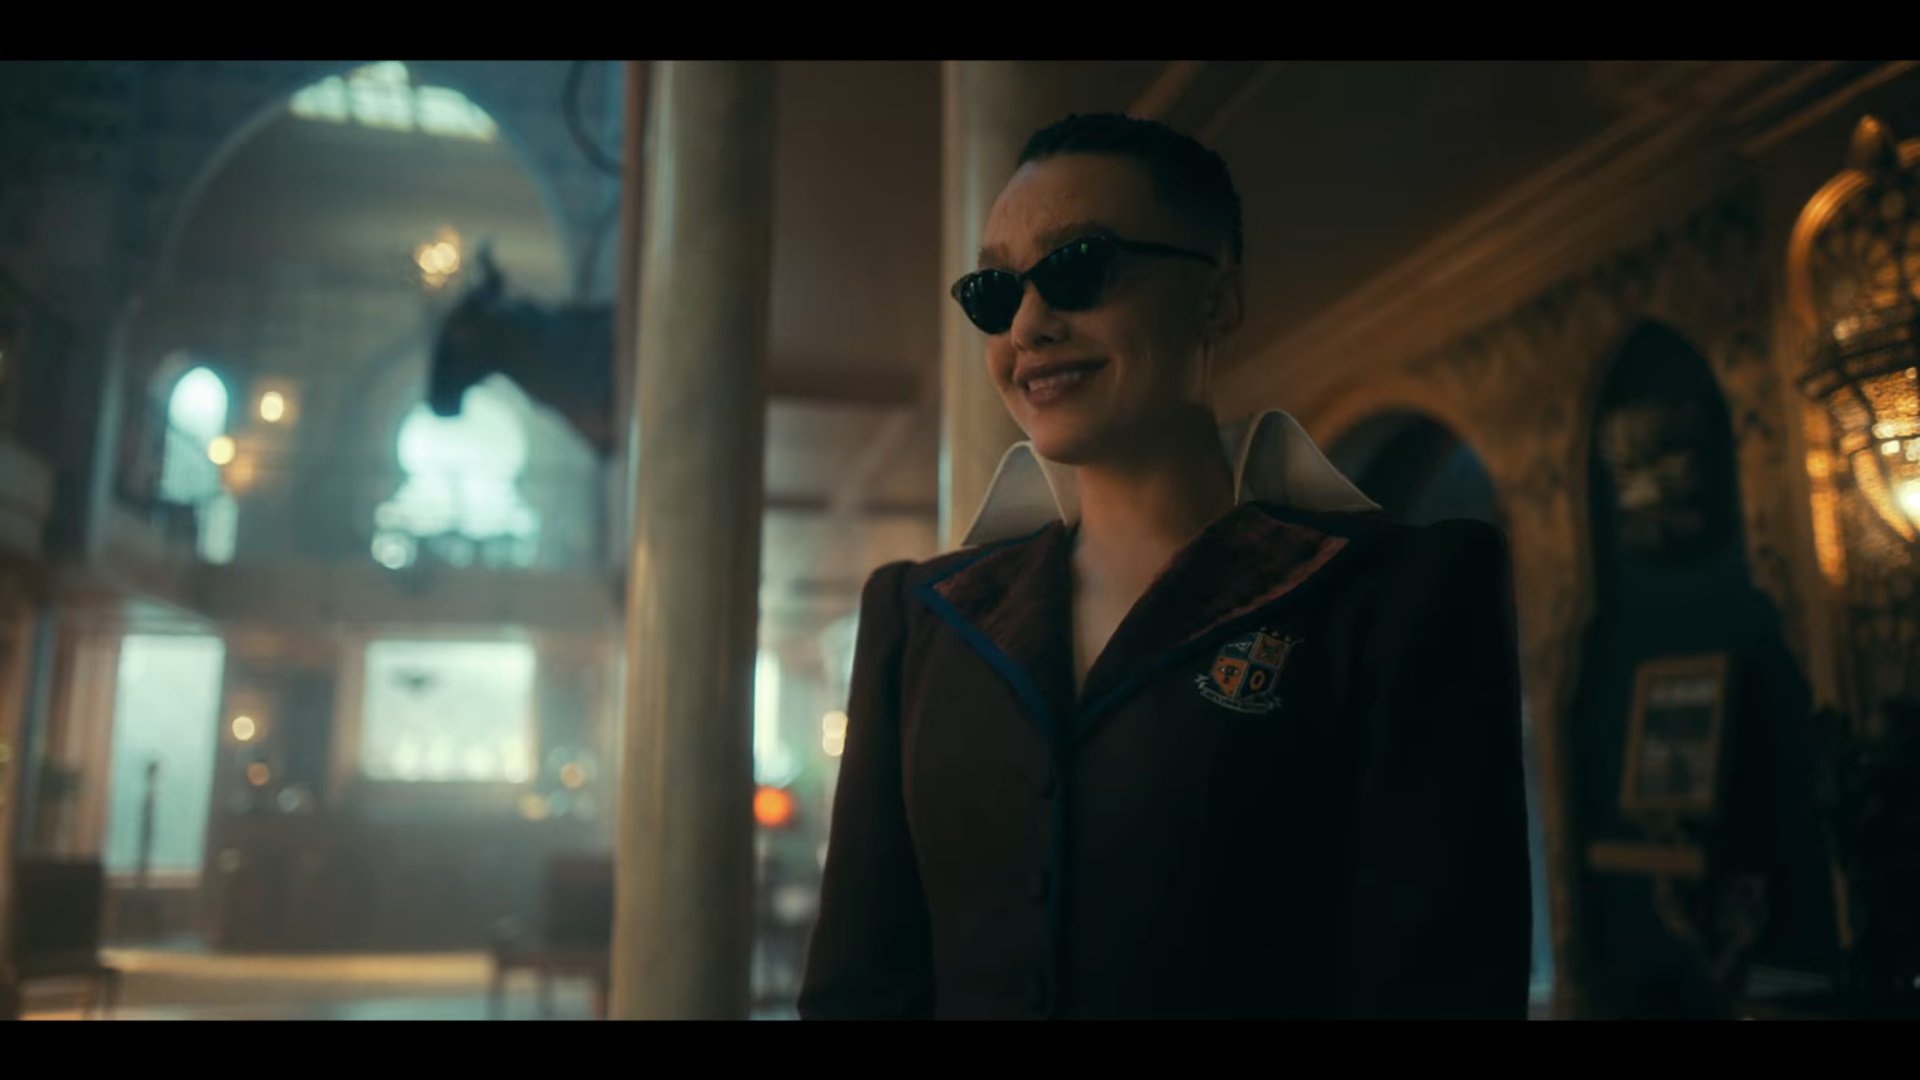 Fei aka Number 3 (Britne Oldford) laughing during the major battle with the Umbrella Academy